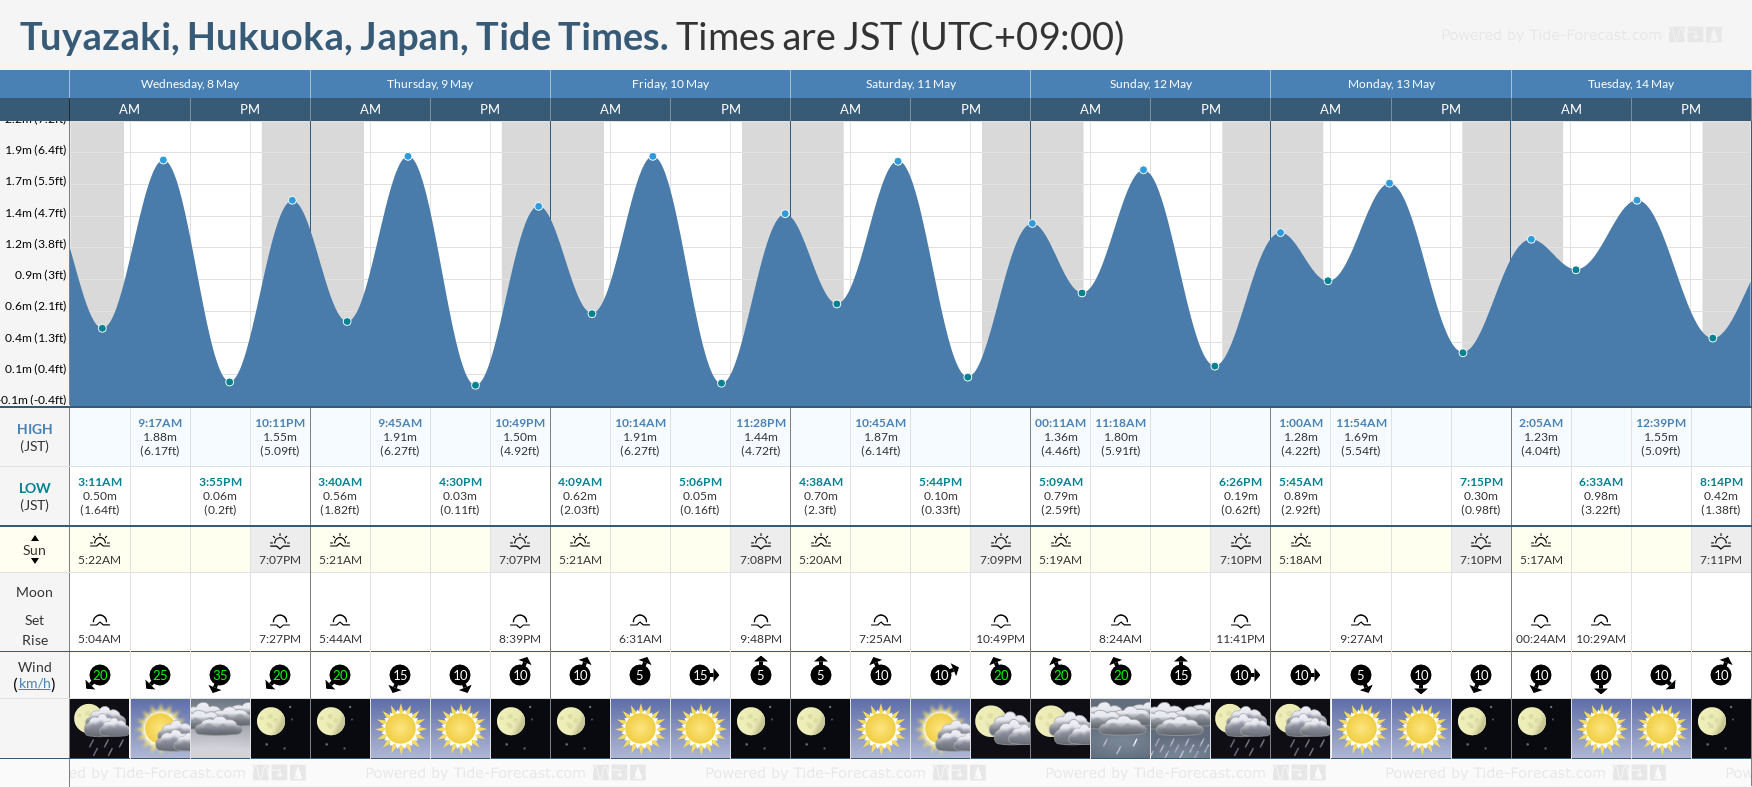 Tuyazaki, Hukuoka, Japan Tide Chart including high and low tide tide times for the next 7 days